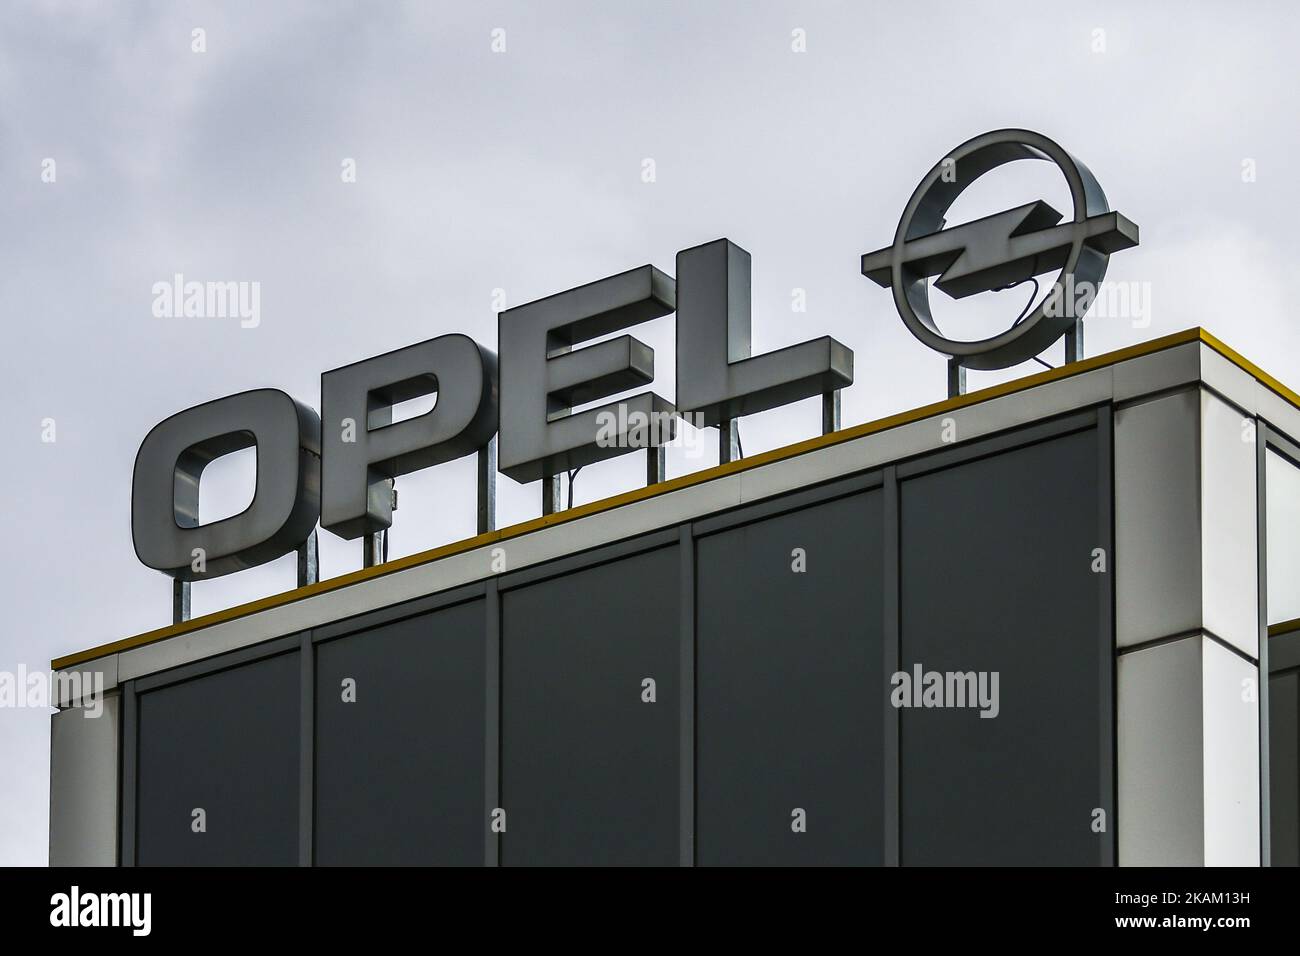 The Opel car factory of General Motors Manufacturing Poland in Gliwice, Poland, on March 7, 2017. General Motors is selling its loss-making European car business, including Germany's Opel and British brand Vauxhall, to France's PSA group. (Photo by Beata Zawrzel/NurPhoto) *** Please Use Credit from Credit Field *** Stock Photo